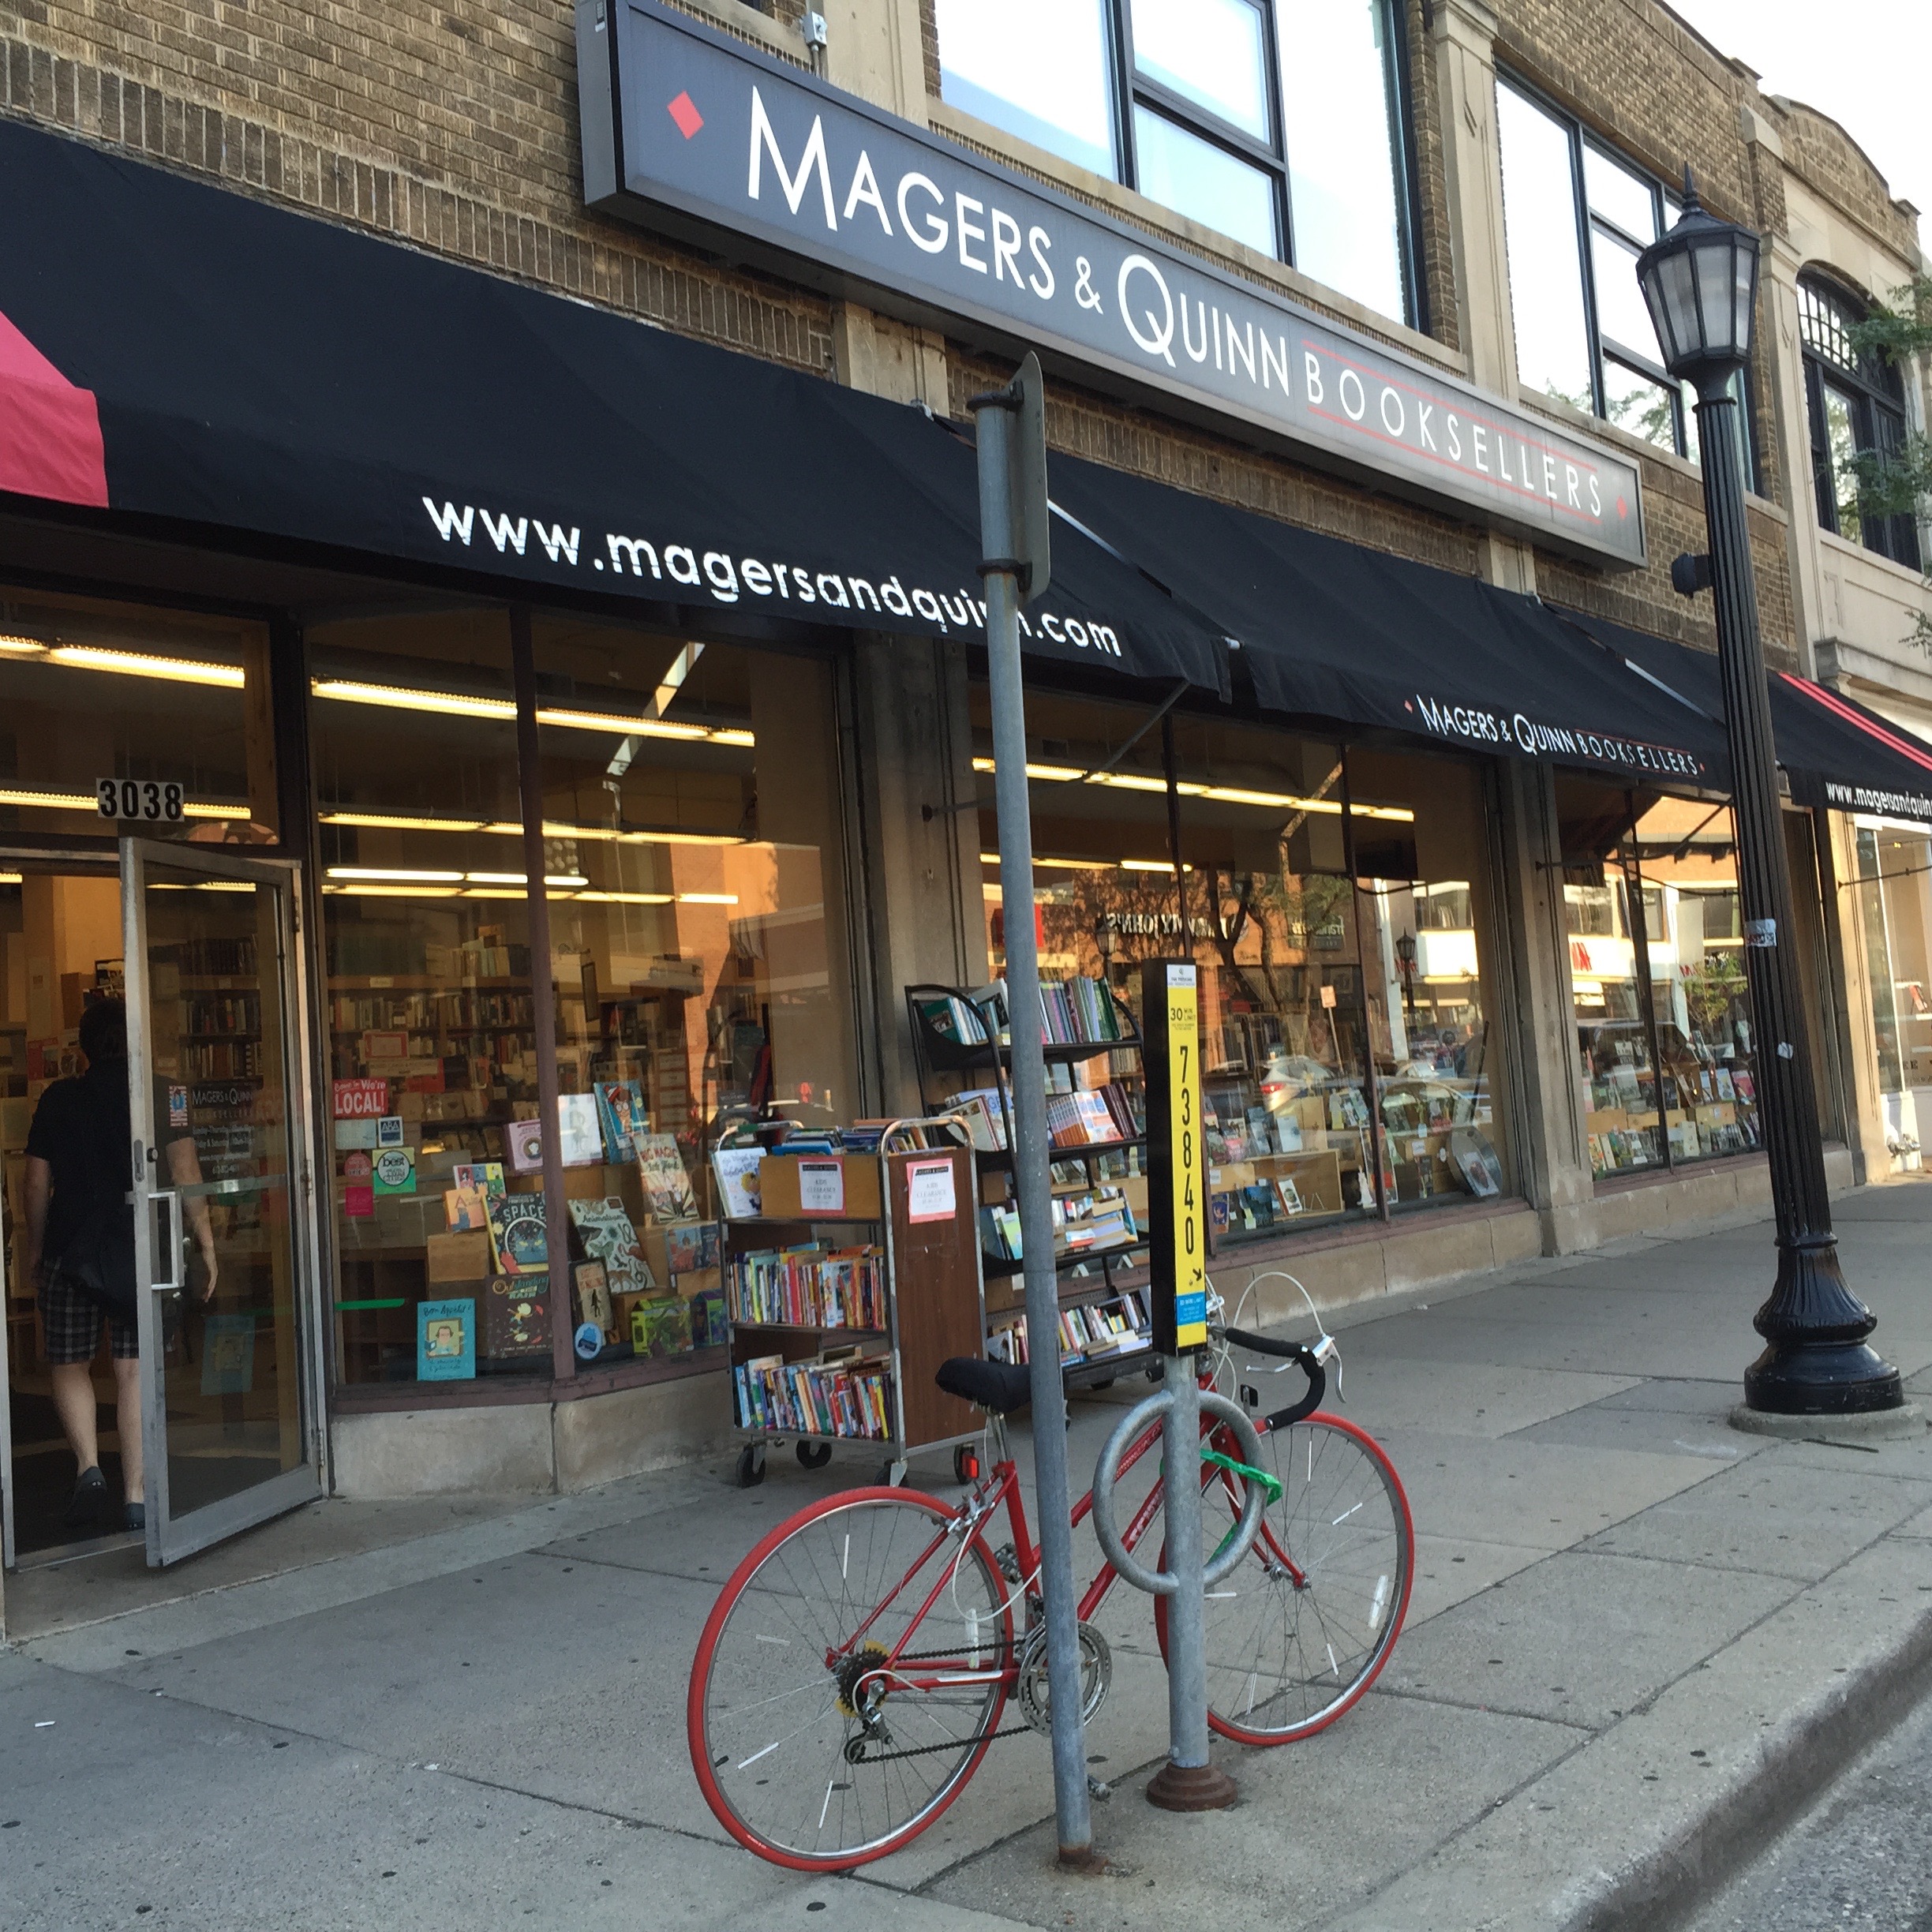  Magers and Quinn Booksellers Event in Minneapolis, MN in July 